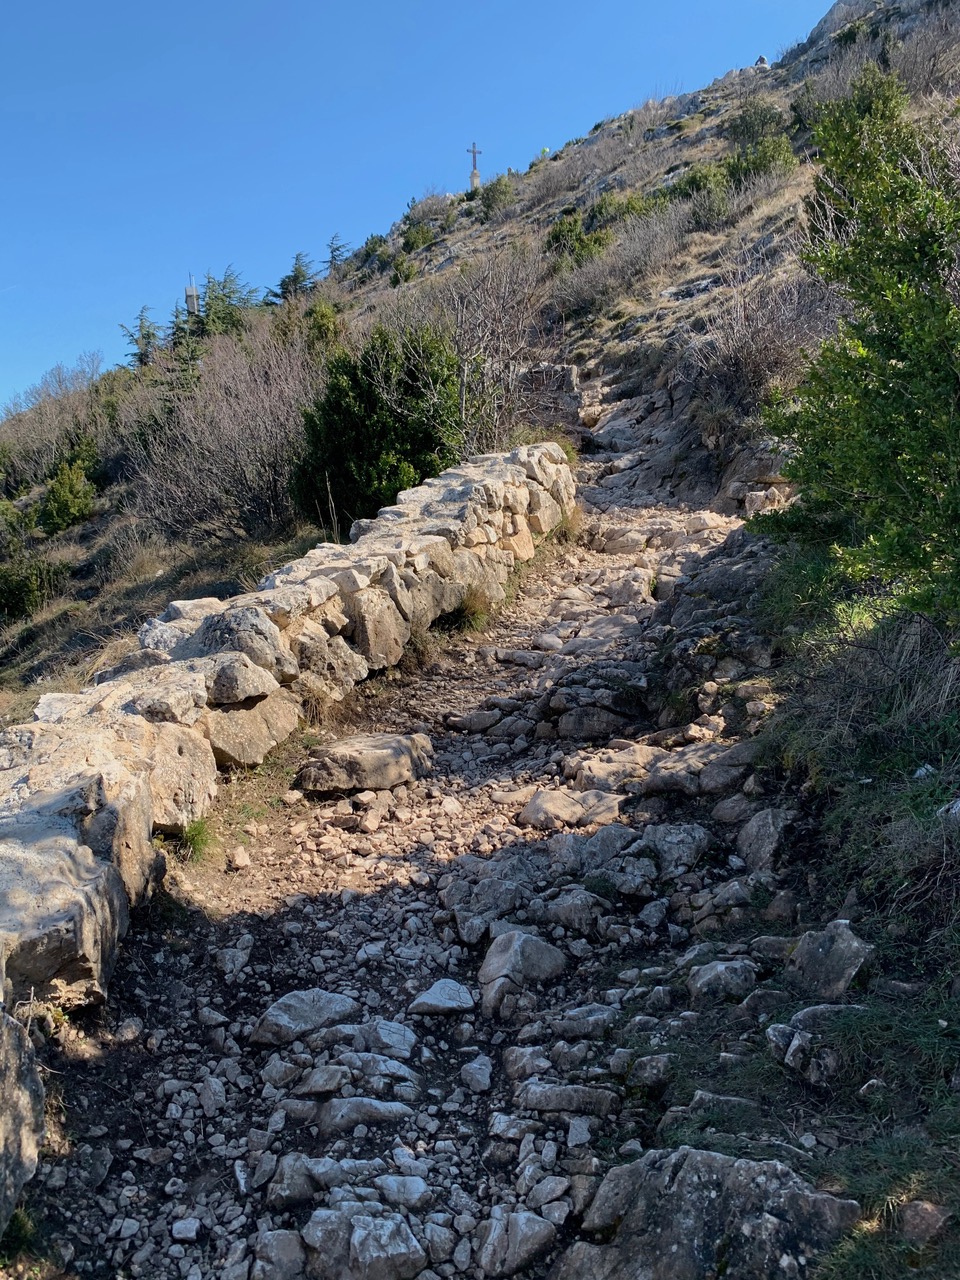 Rocky path to the top of Montagne Sainte-Victoire with the cross barely visible against the blue sky